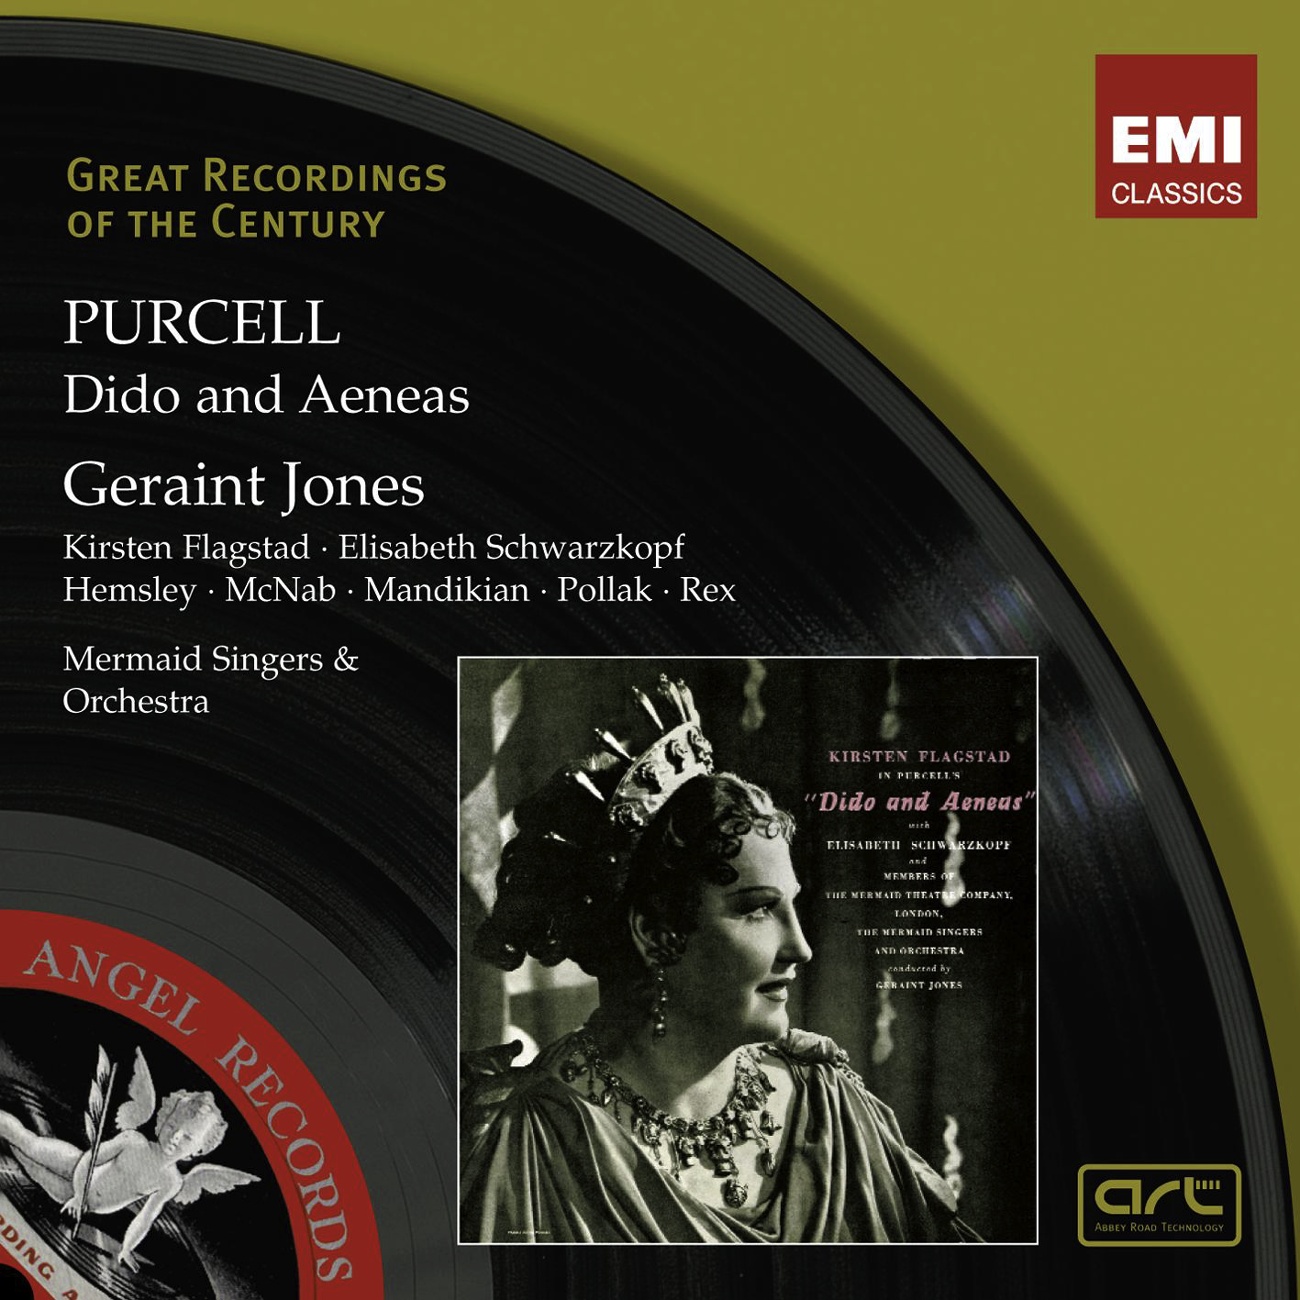 Dido and Aeneas Z626 (ed. Geraint Jones) (2008 Remastered Version), ACT 1: See, your Royal Guest appears (Belinda)